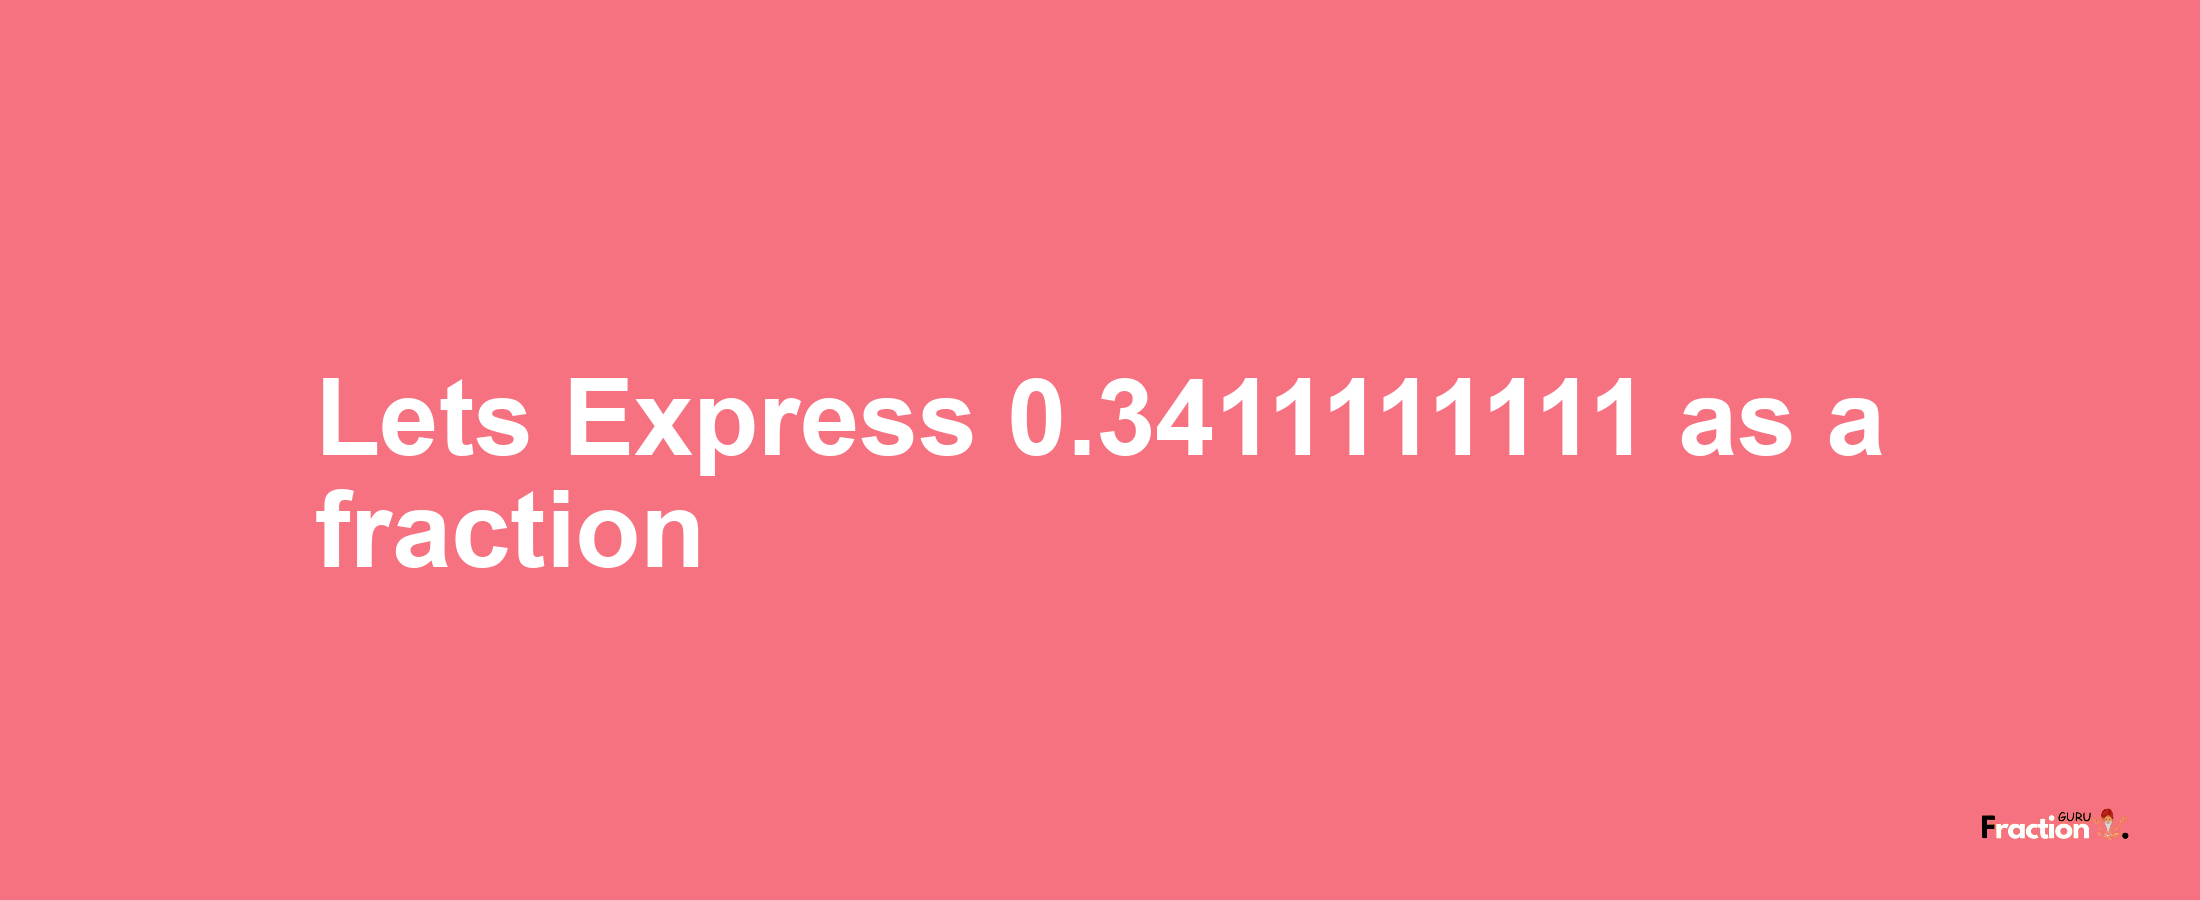 Lets Express 0.3411111111 as afraction